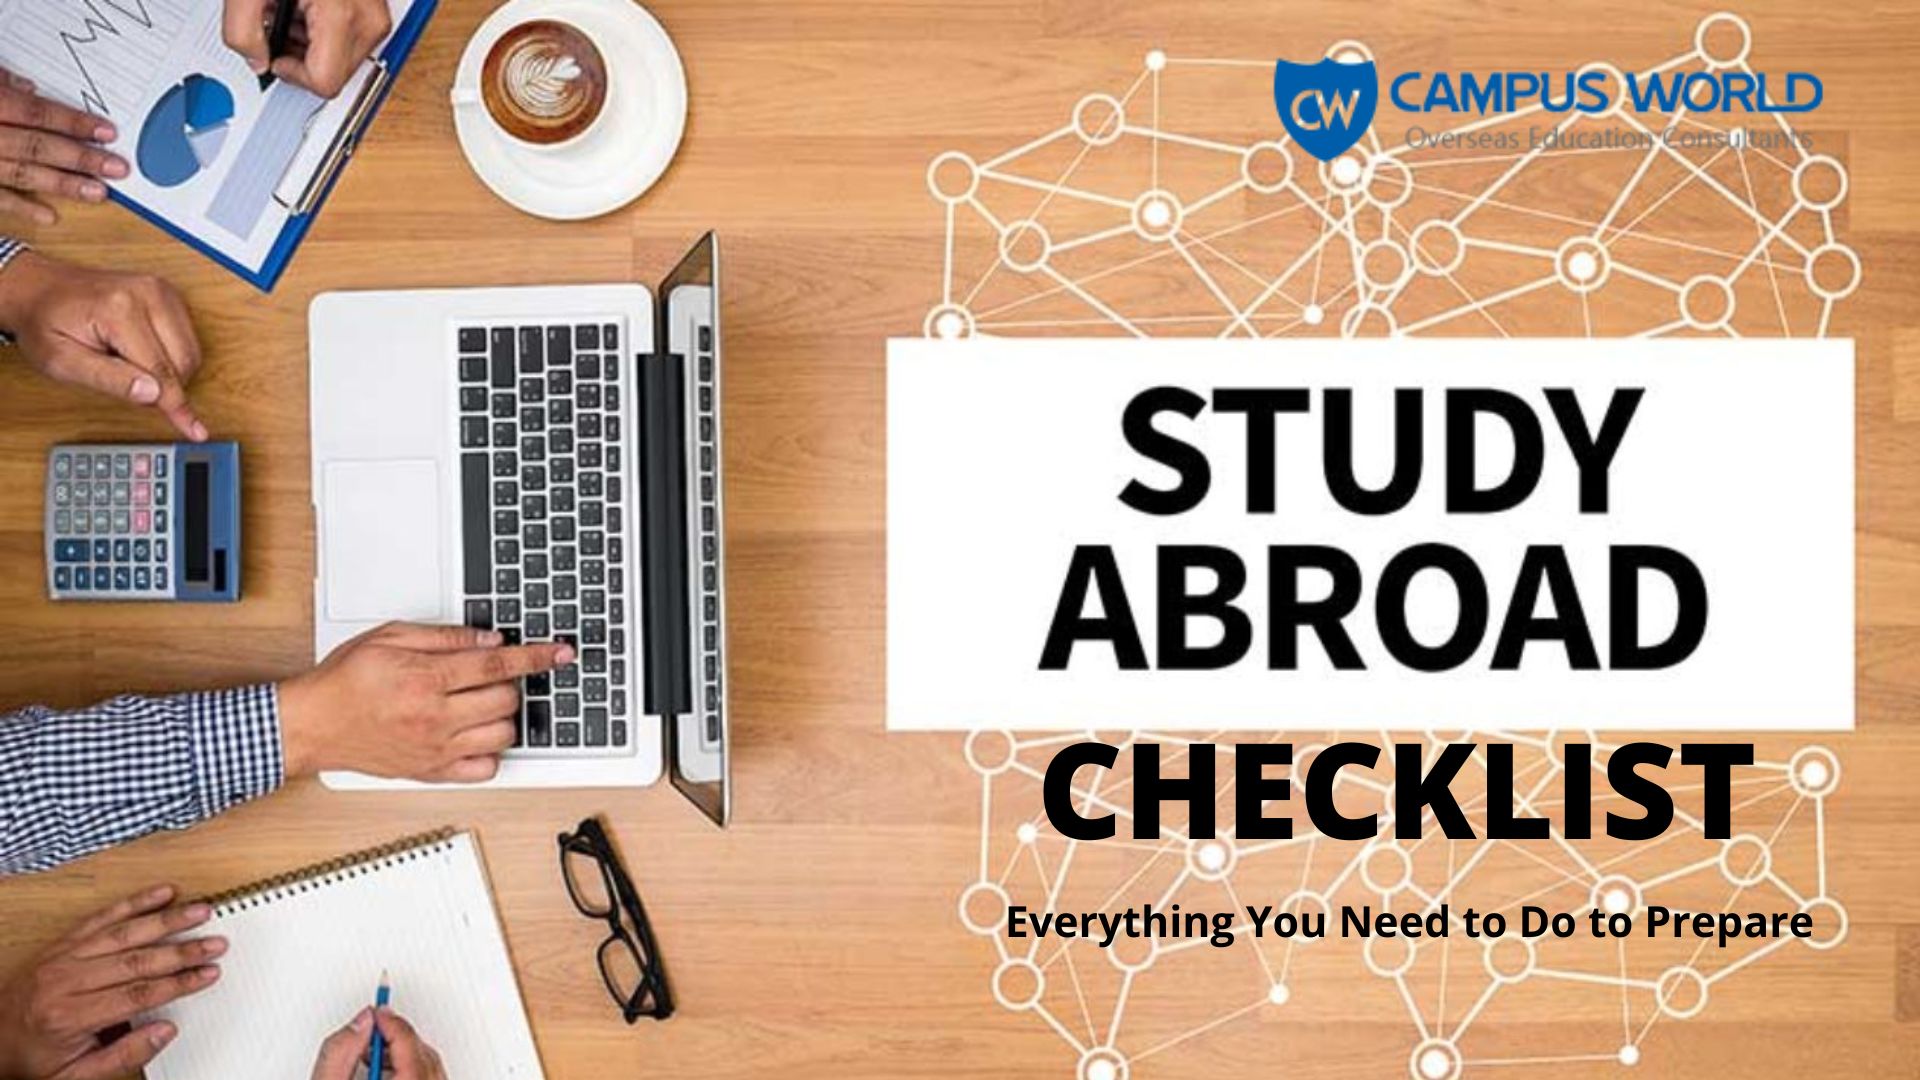 Study Abroad Checklist: Everything You Need to Do to Prepare